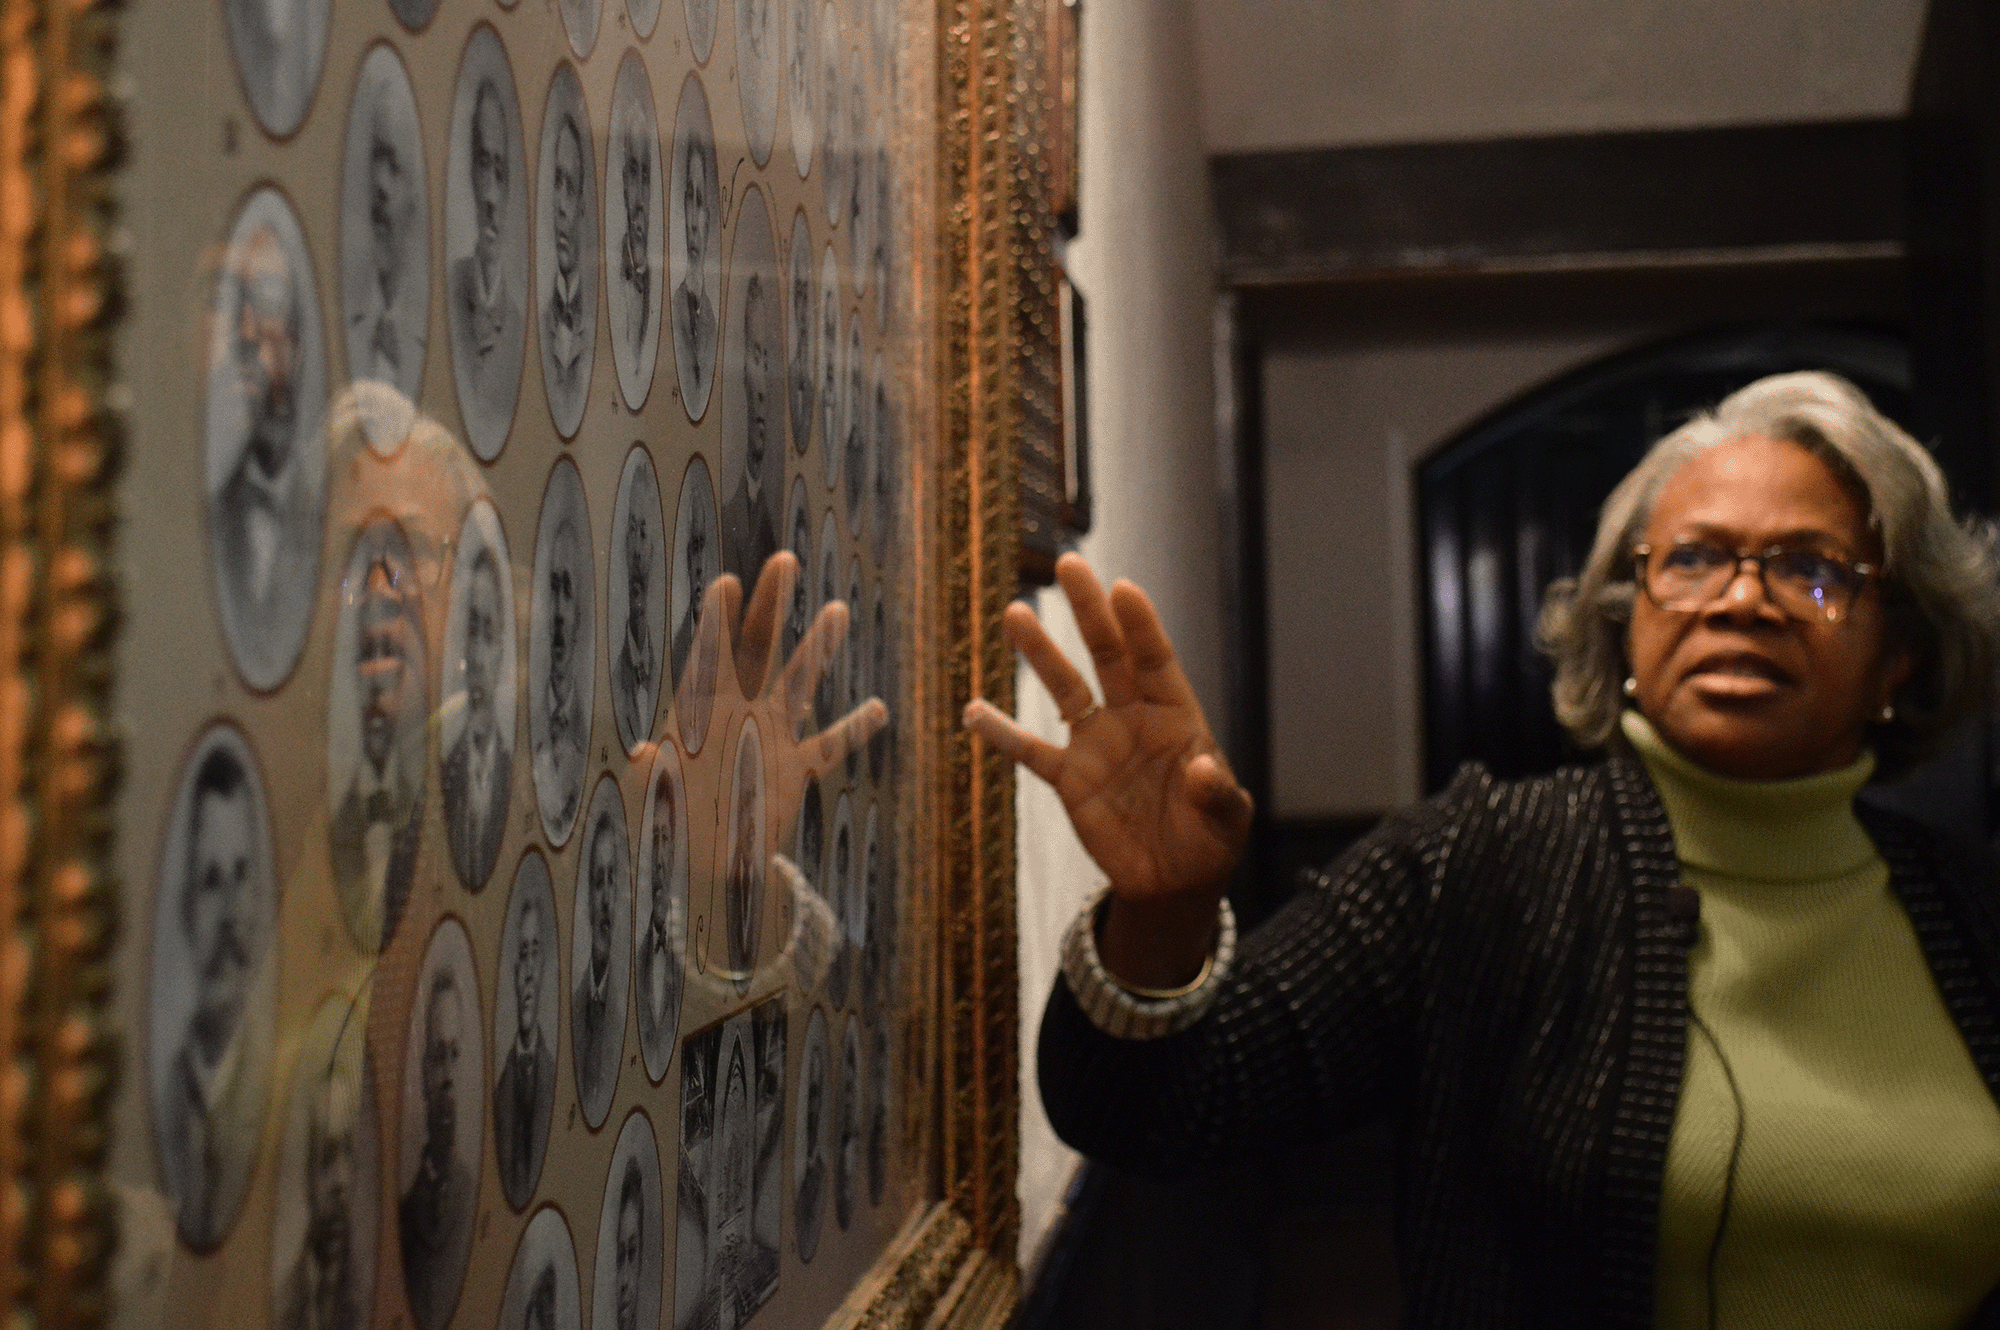 A woman gestures towards a framed picture showing a number of historical portraits